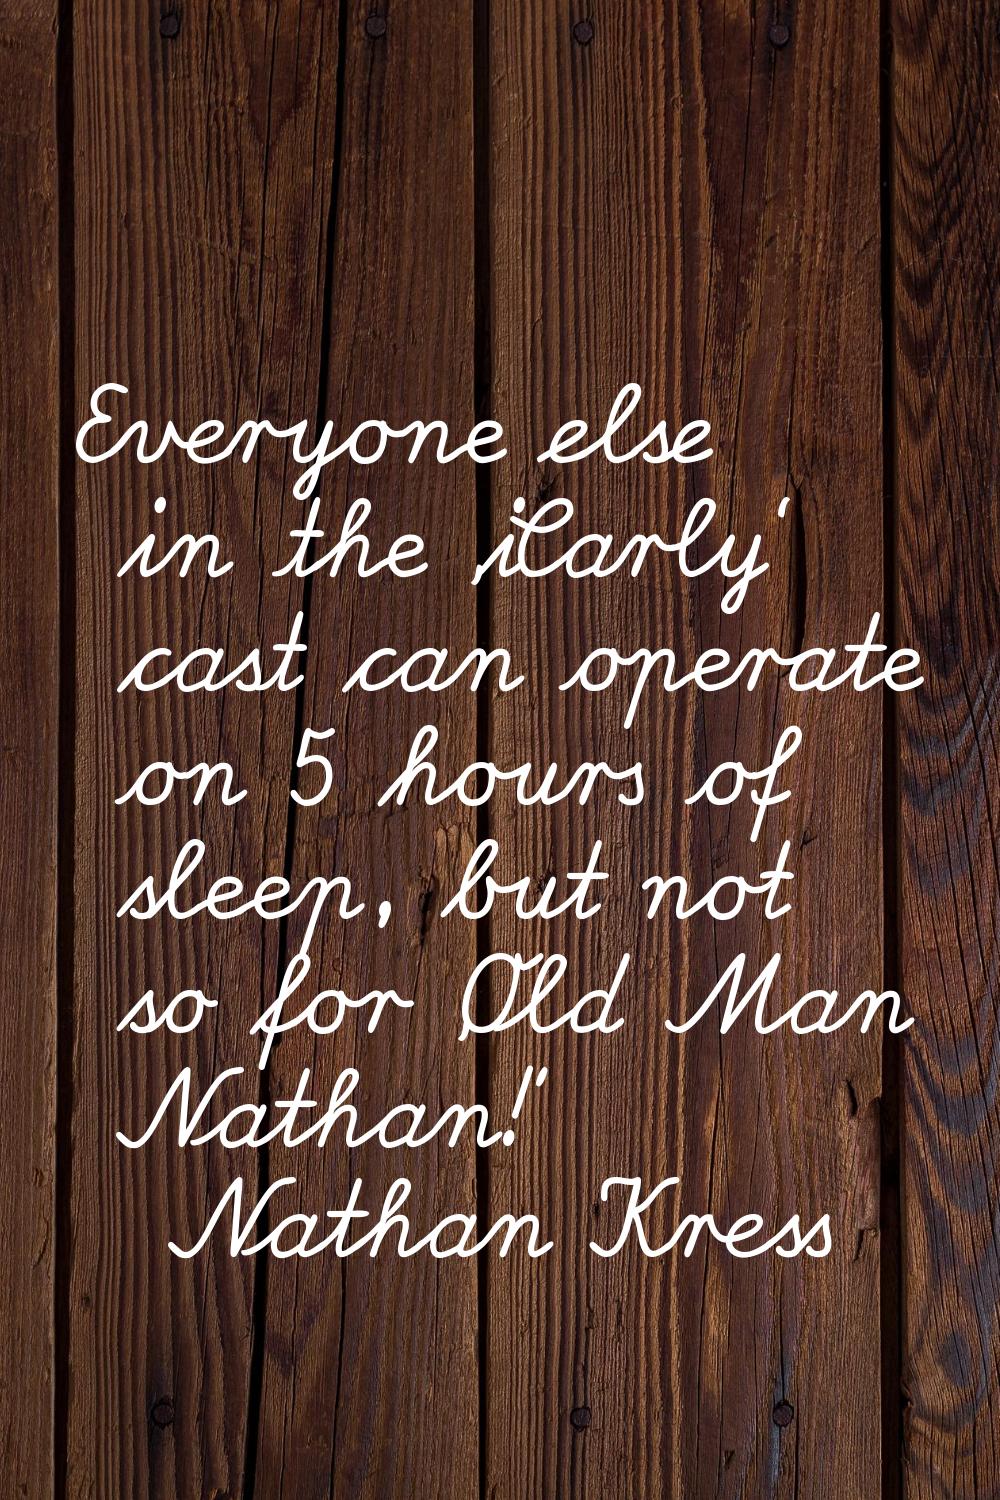 Everyone else in the 'iCarly' cast can operate on 5 hours of sleep, but not so for 'Old Man Nathan!